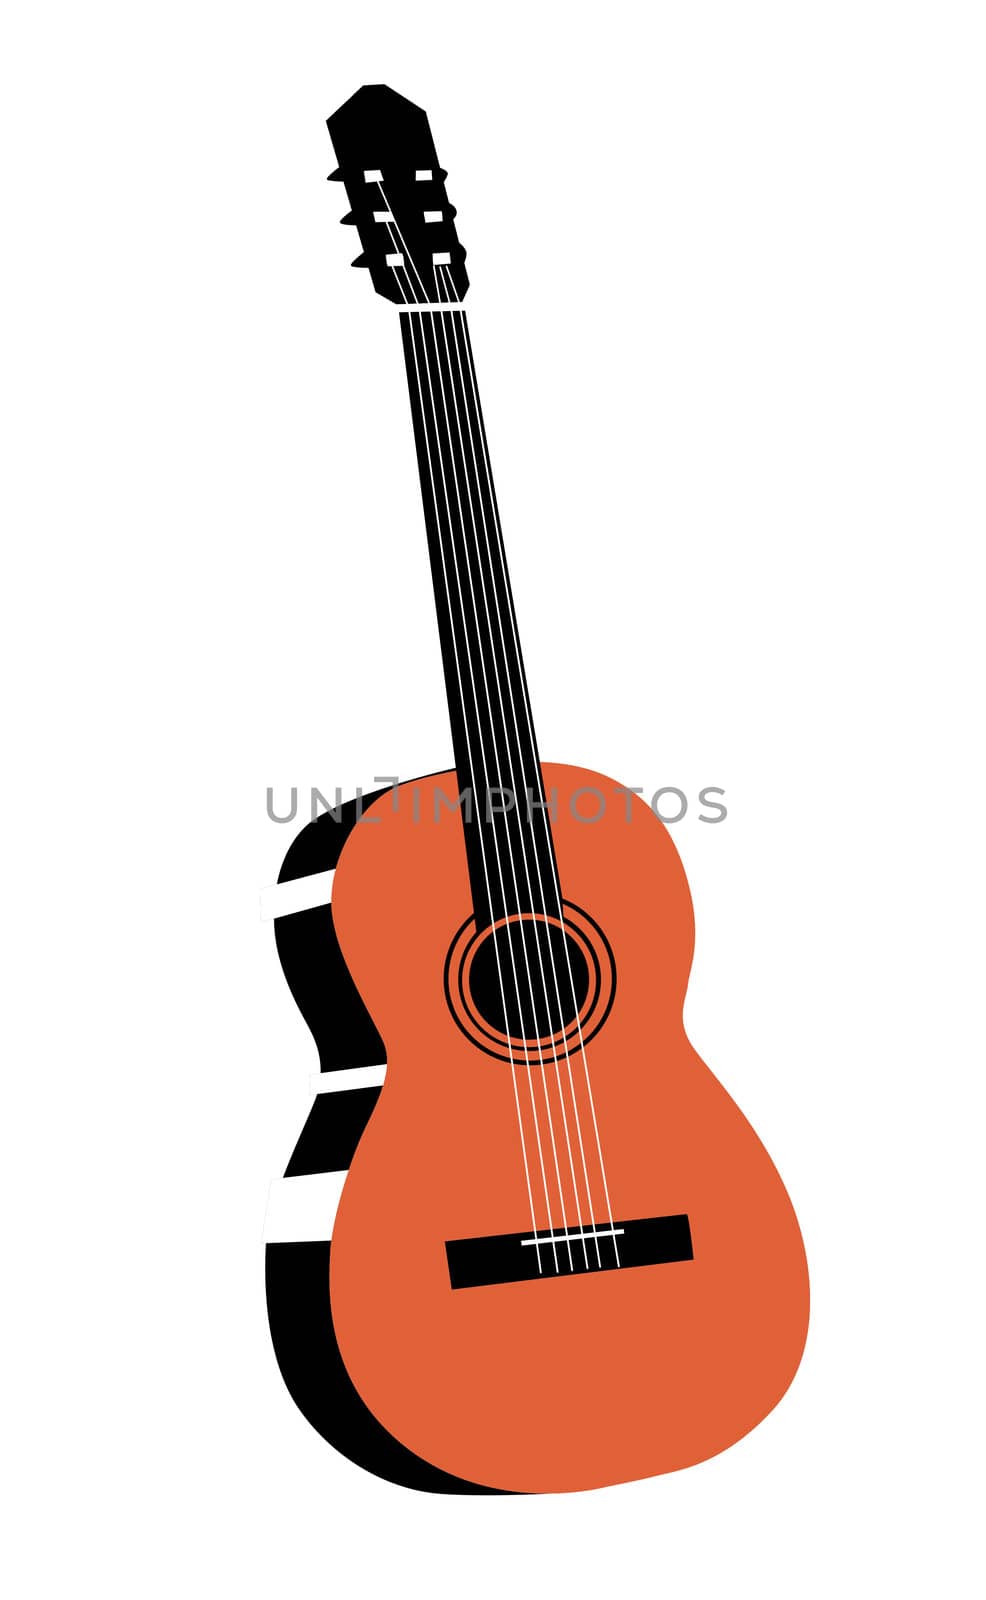 guitar drawing on white background by basel101658